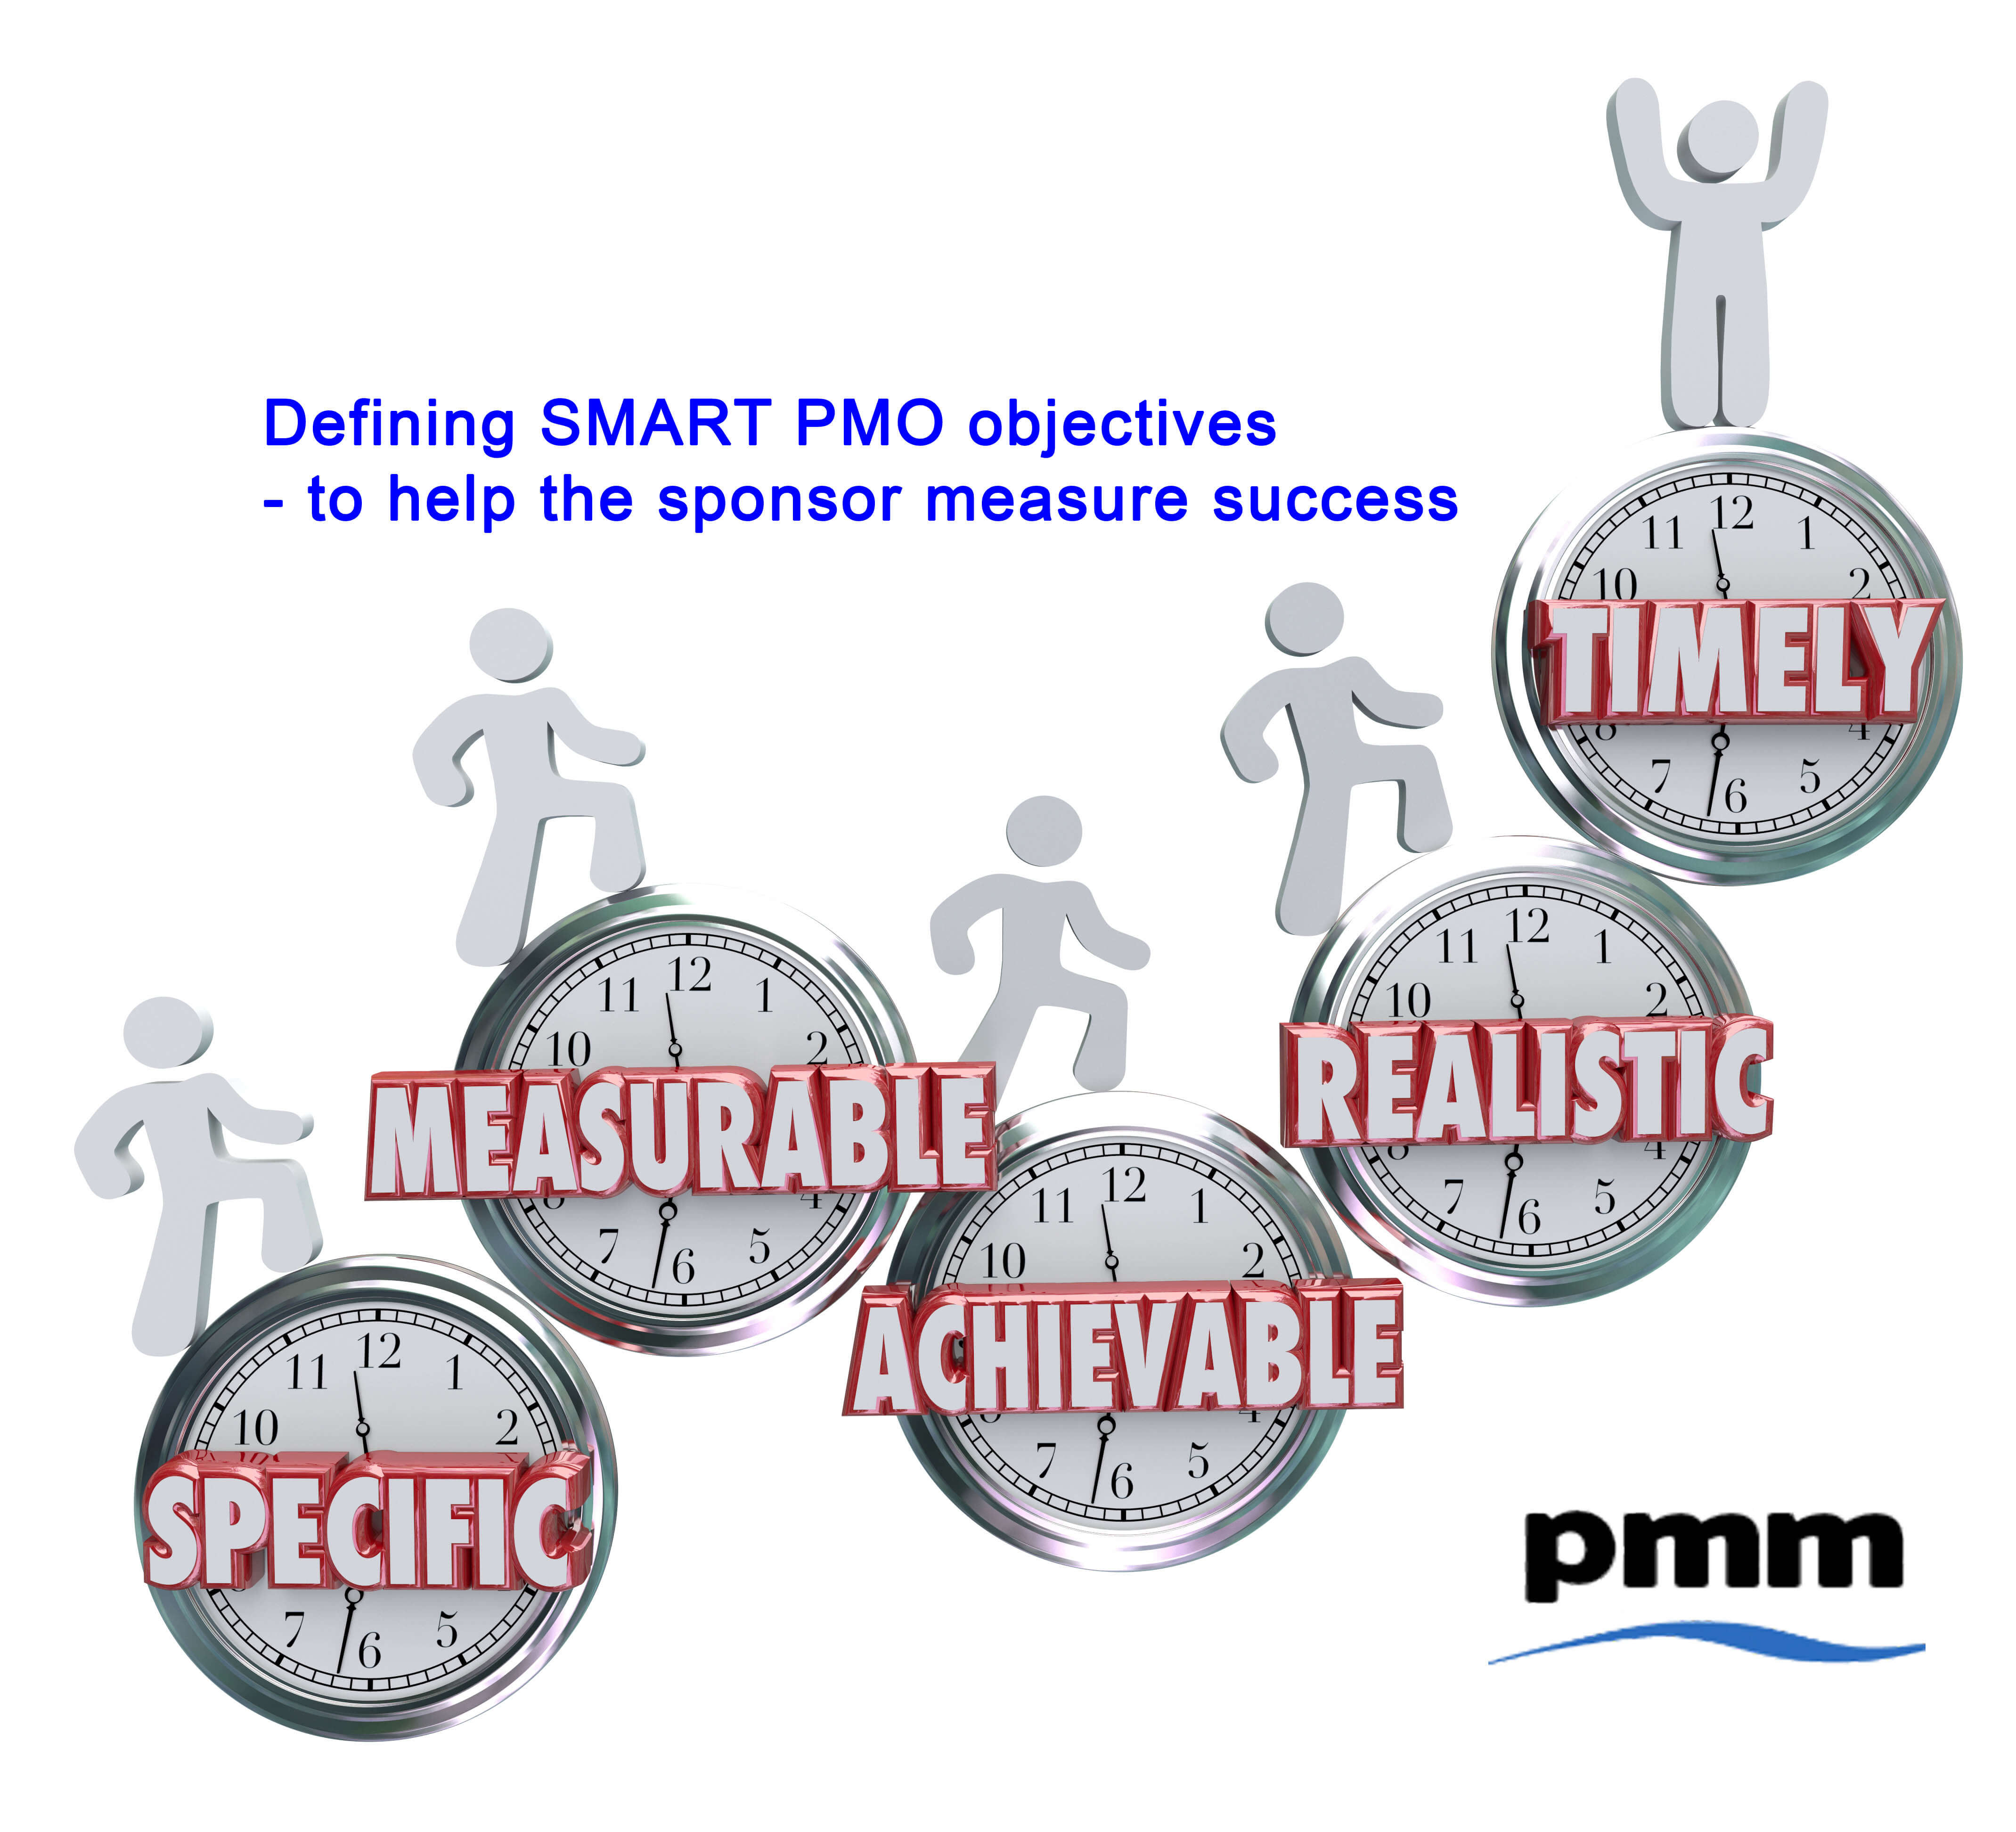 Steps to define SMART PMO objectives